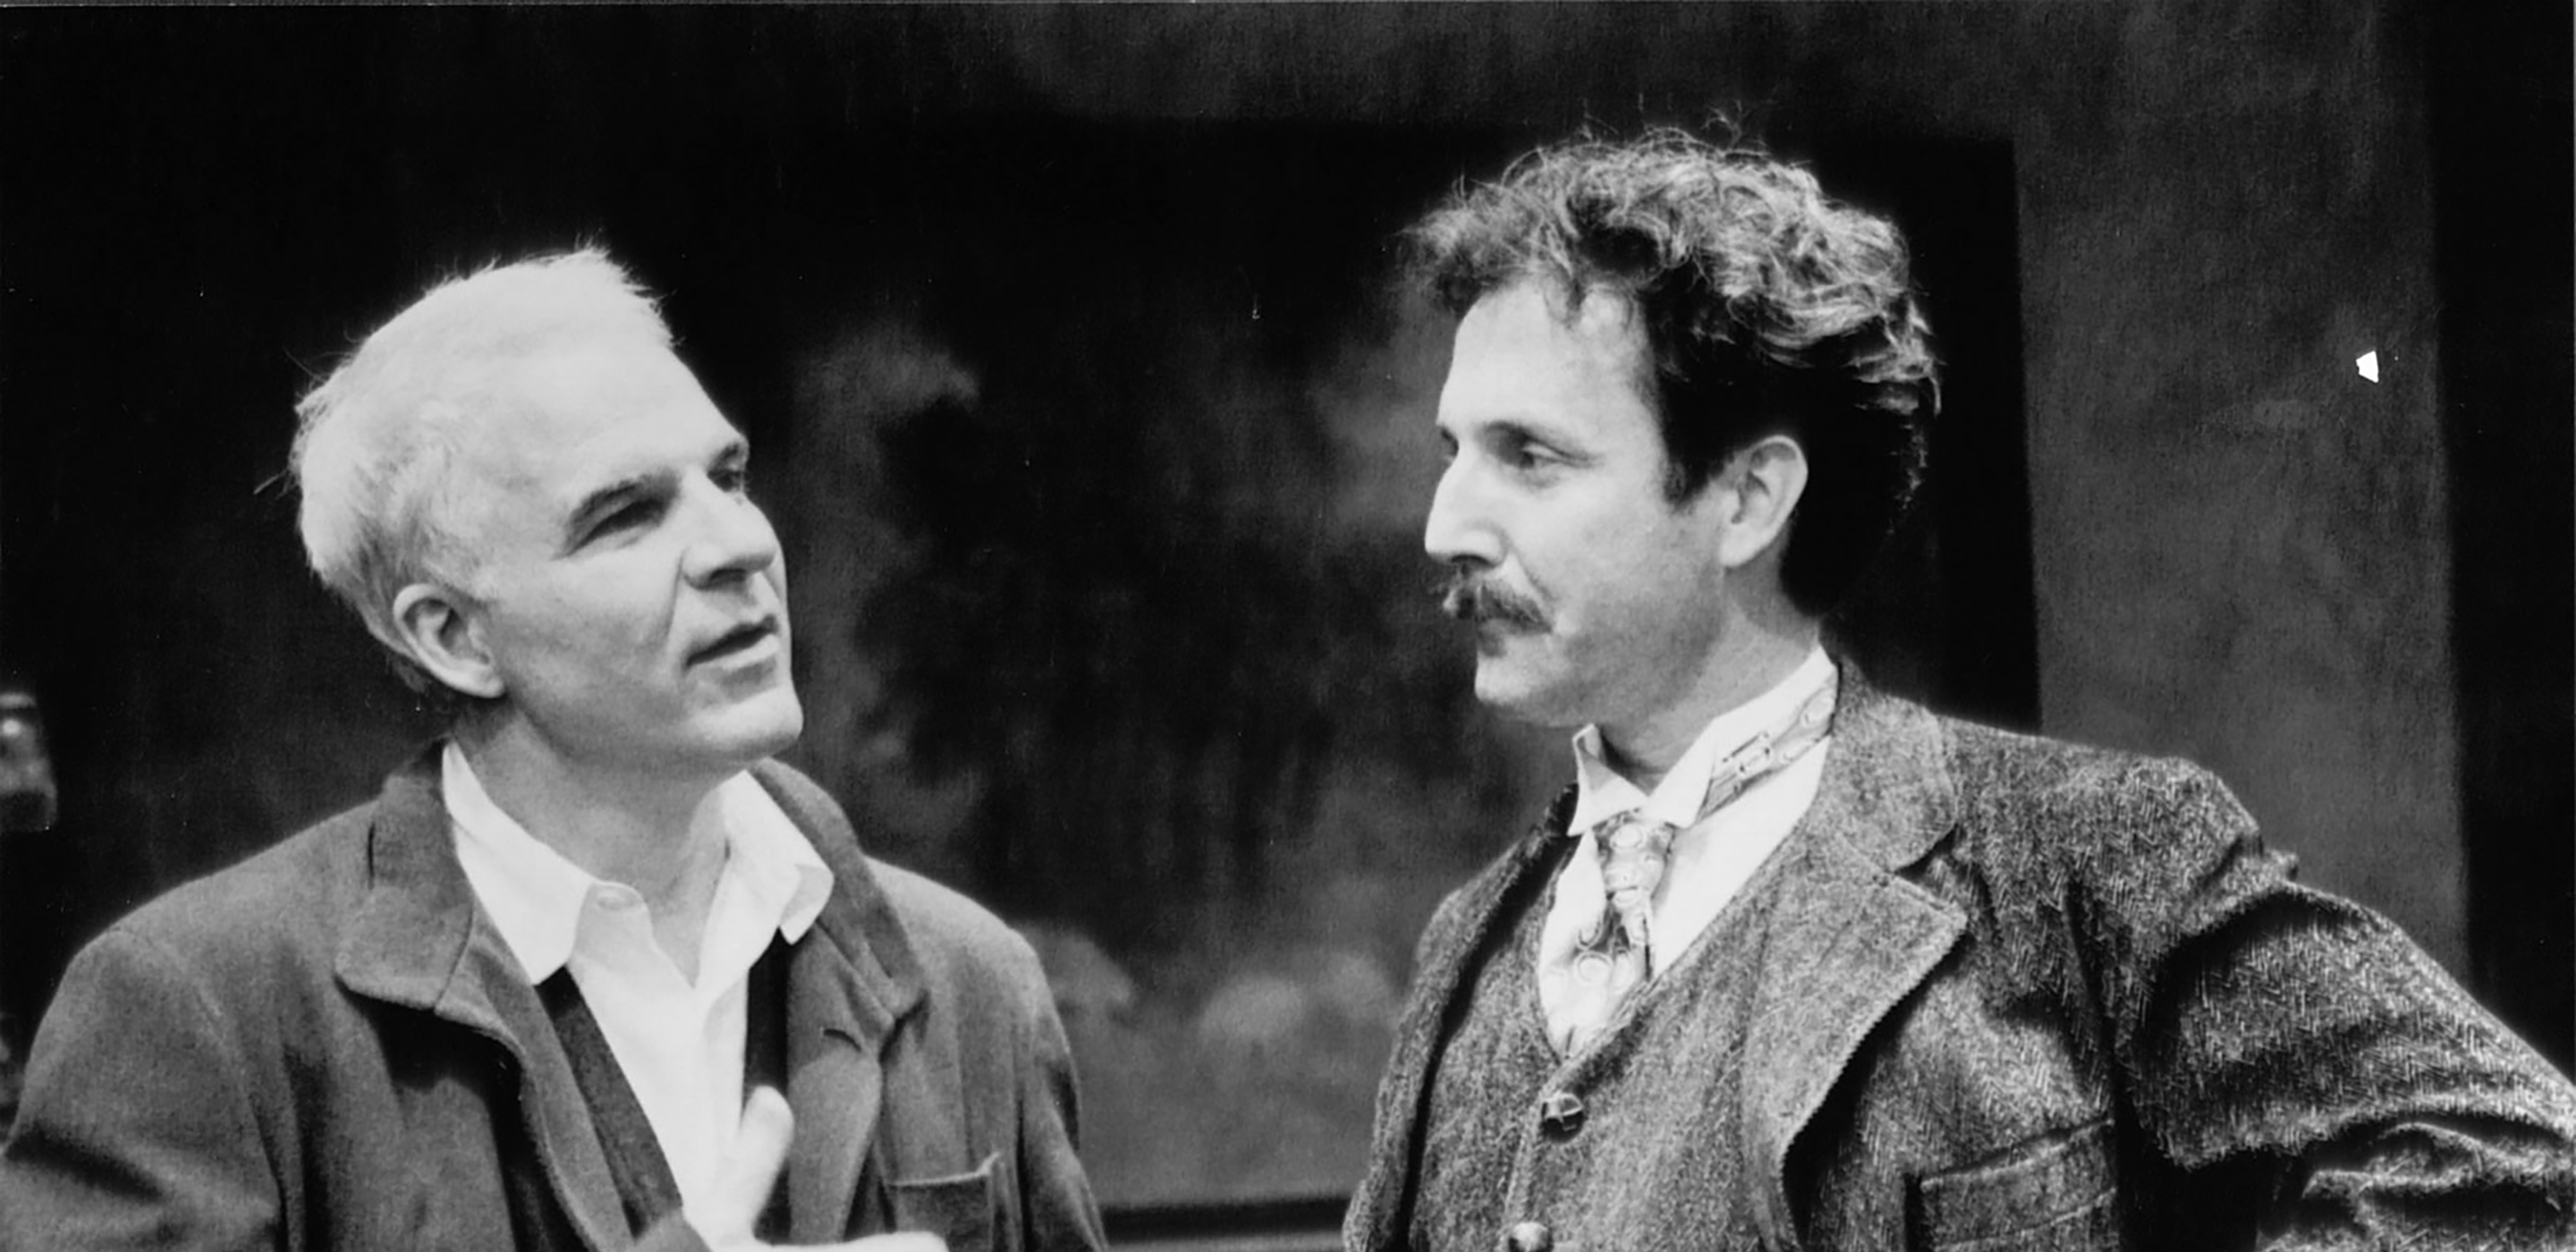 Actor/director/playwright Steve Martin speaks with actor Dan Hiatt on set at Ford's Theatre. Martin is playwright of "Picasso at the Lapin Agile" on stage at Ford's in 1998.